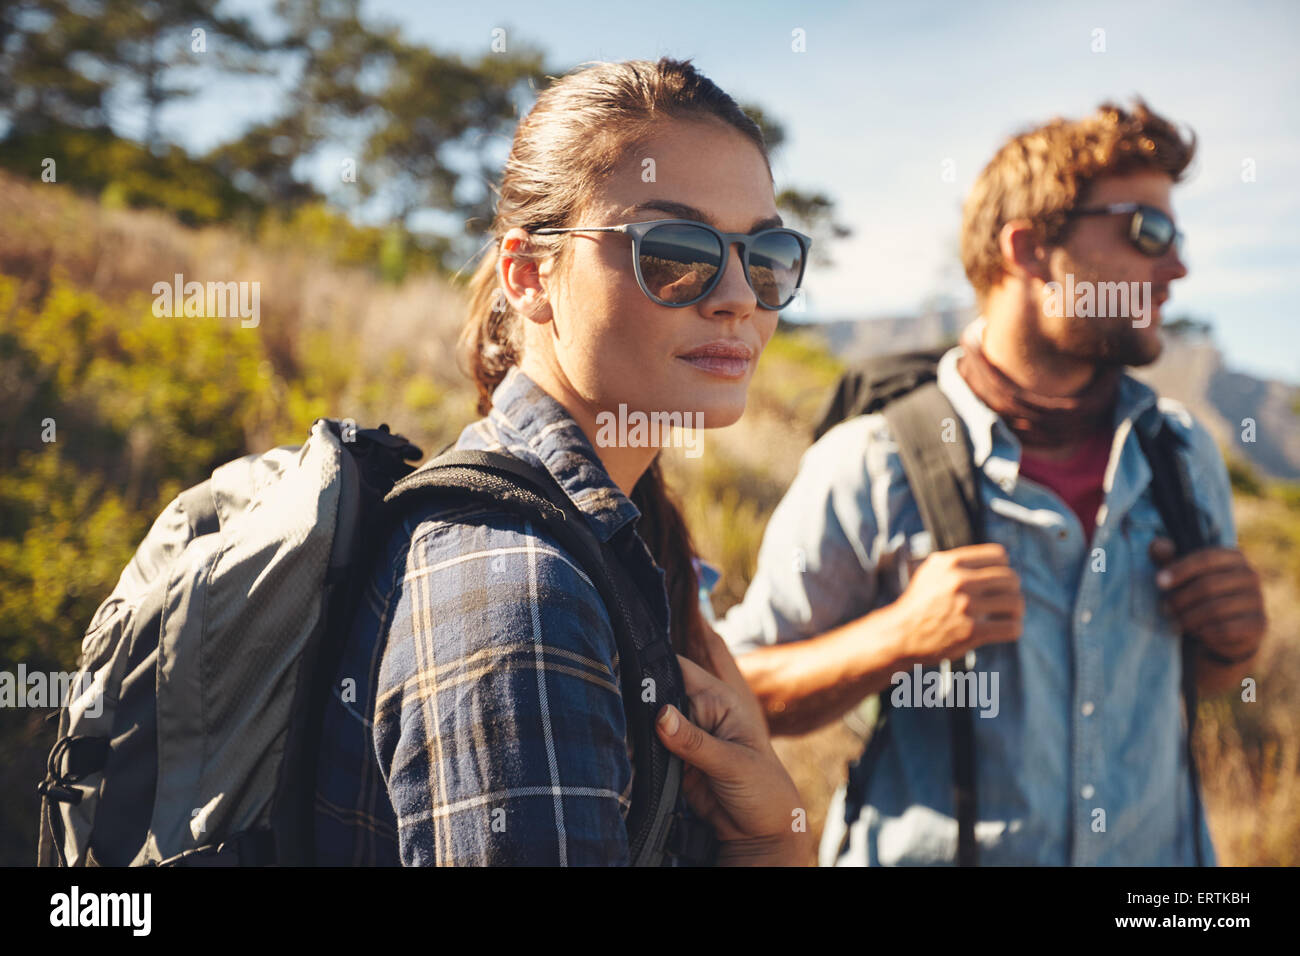 Pretty young woman on a hiking trip with man in the background. Caucasian couple on hike in countryside Stock Photo